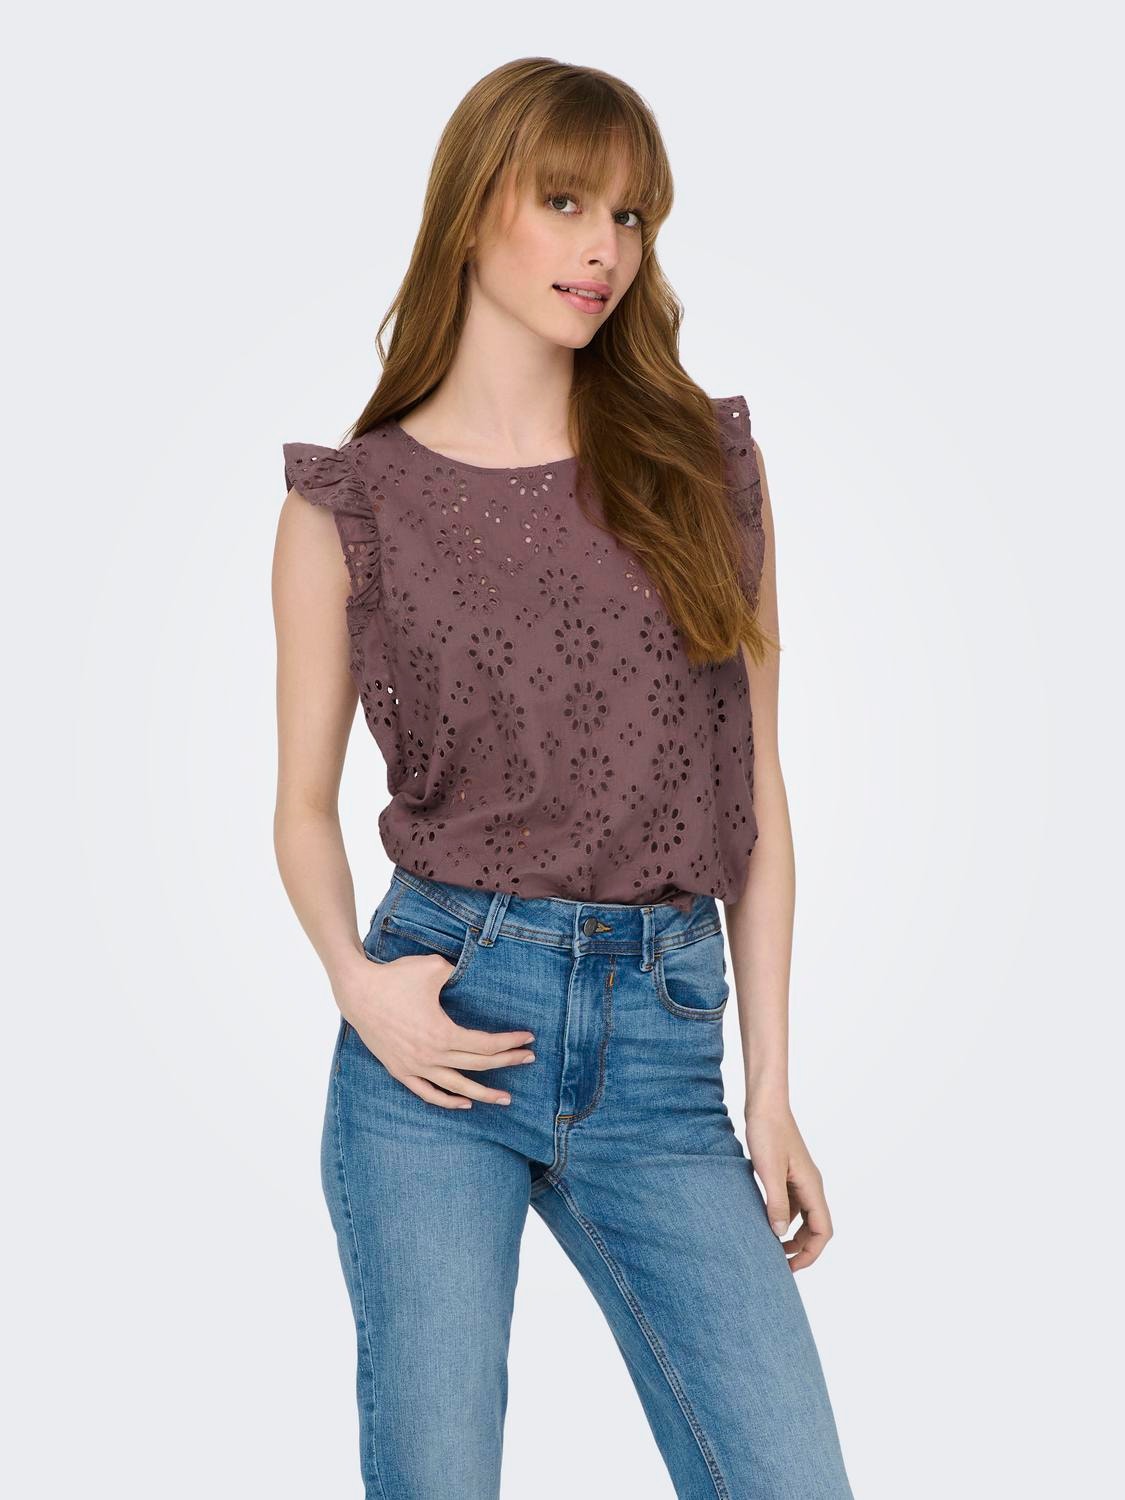 ONLY Regular Fit Round Neck Volume sleeves Top -Rose Brown - 15312383